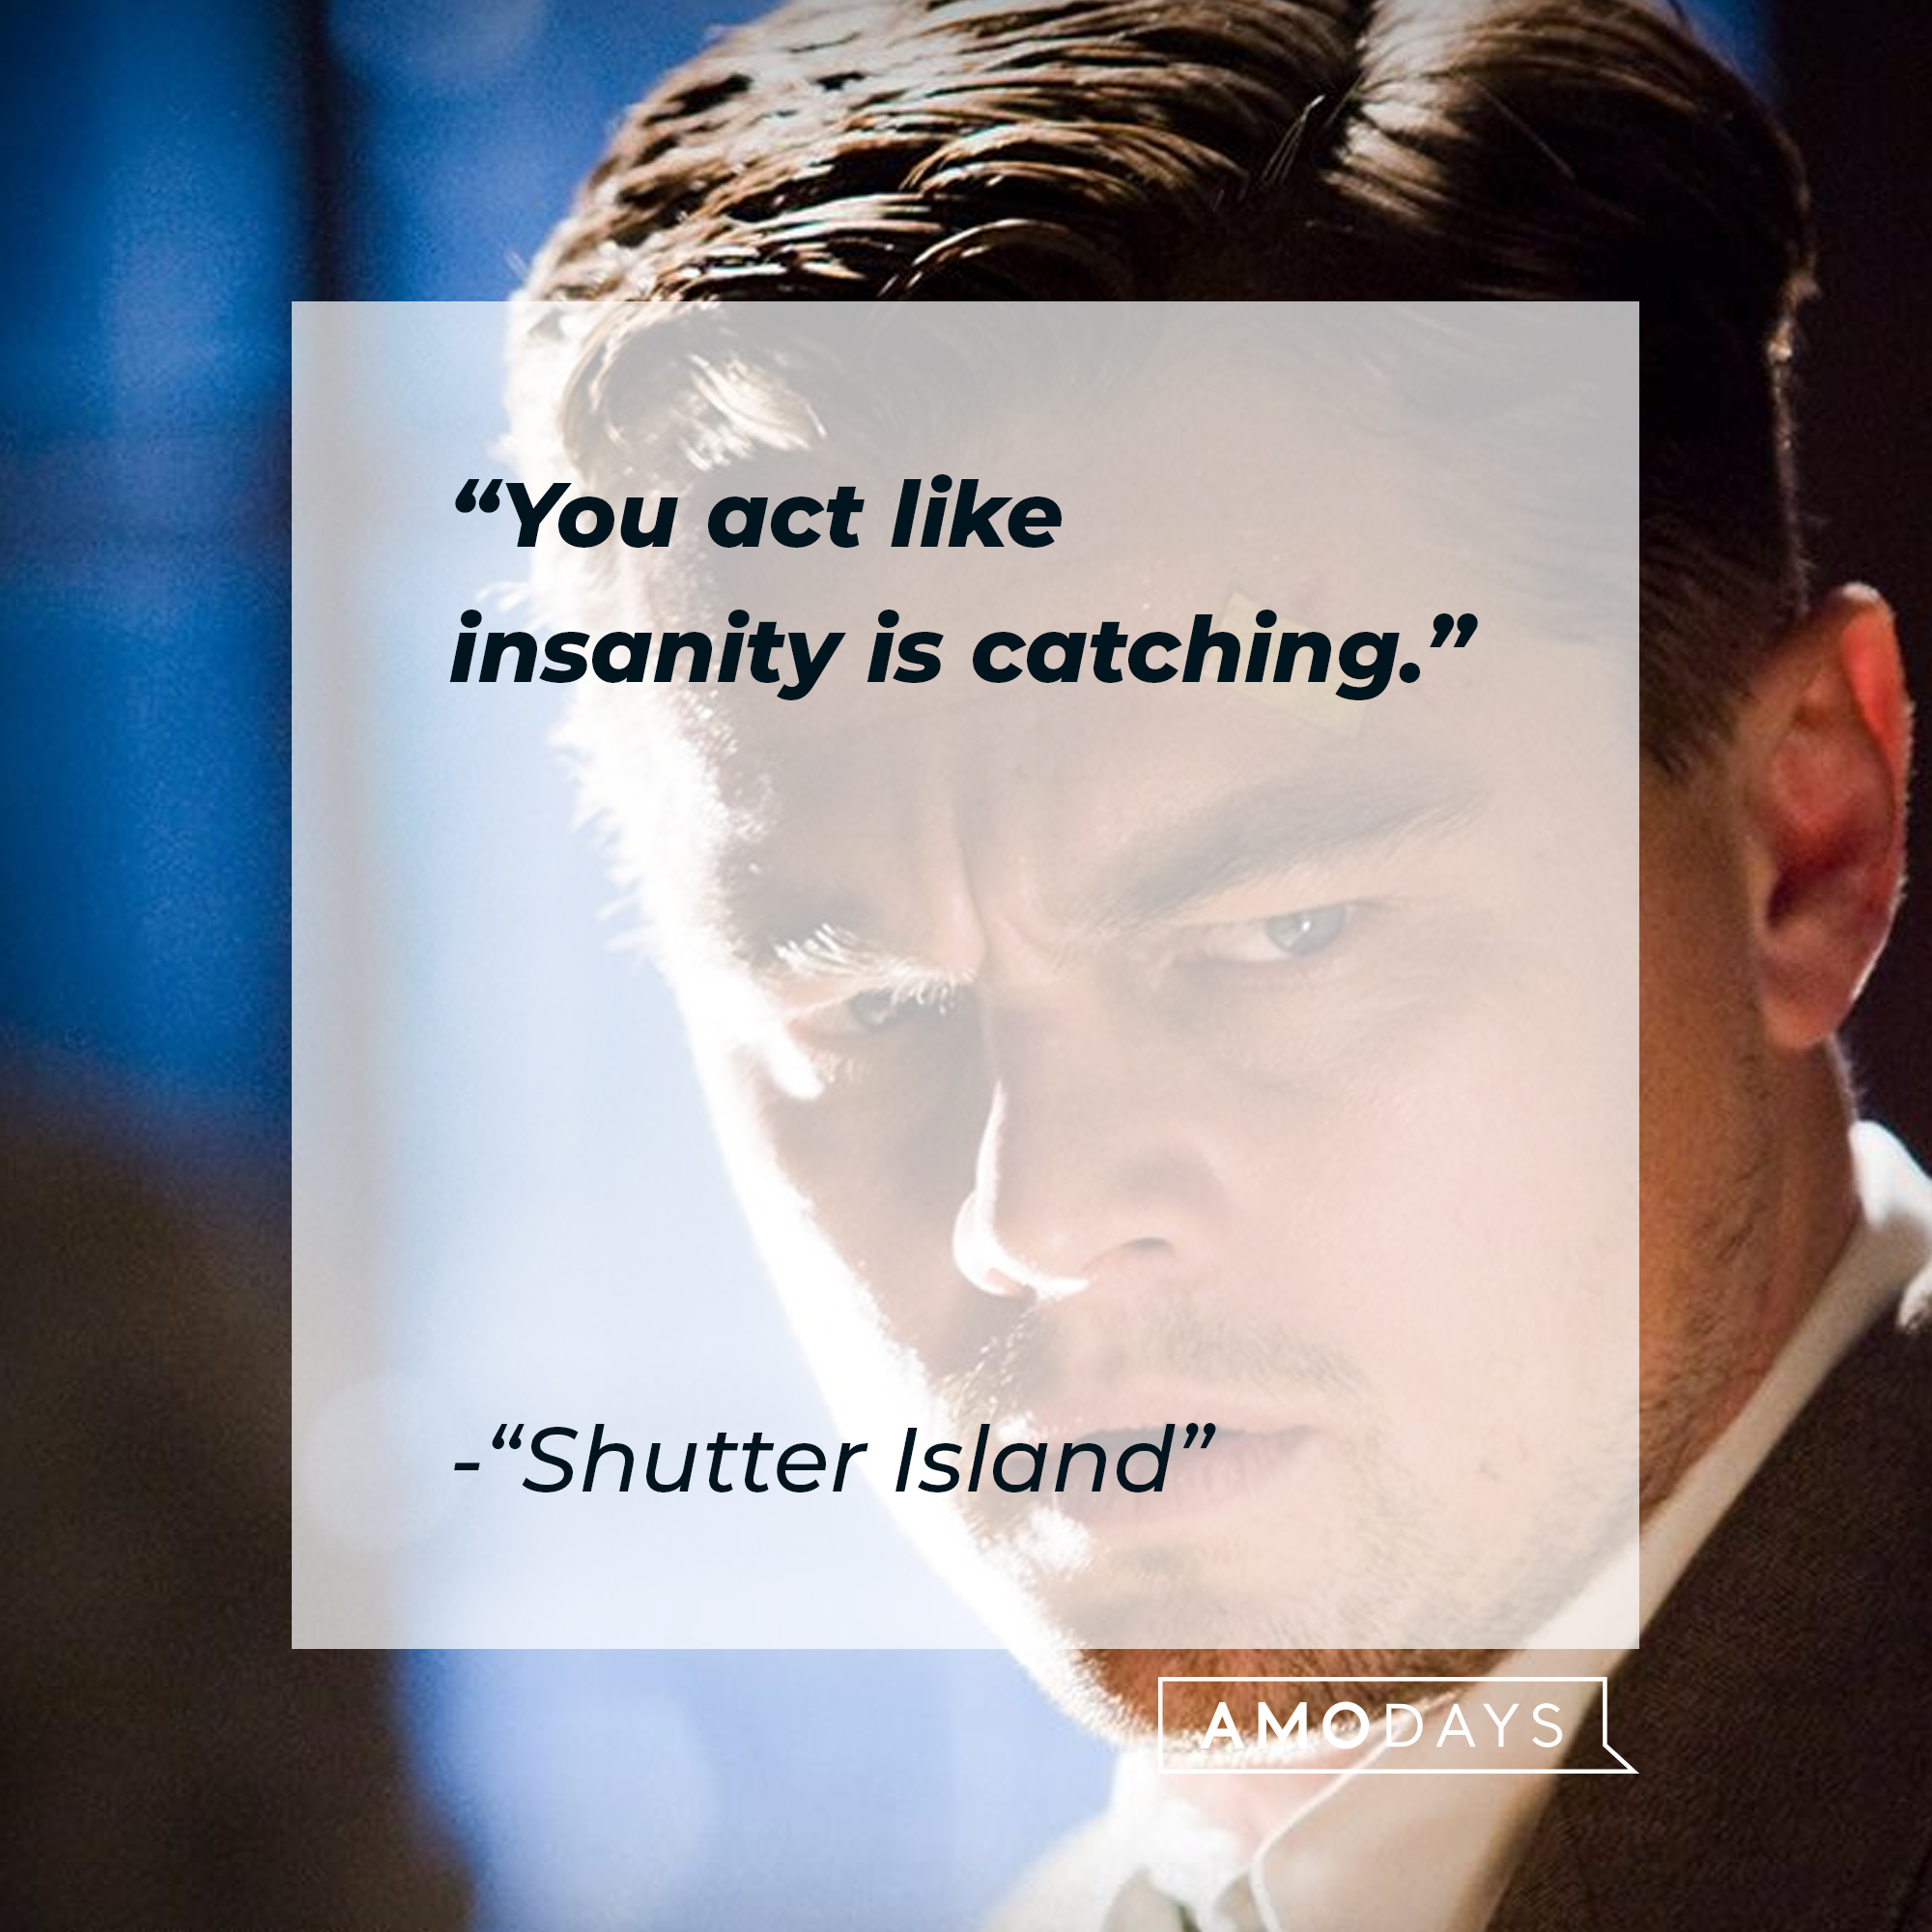 "Shutter Island" quote: "You act like insanity is catching." | Source: facebook.com/ShutterIsland